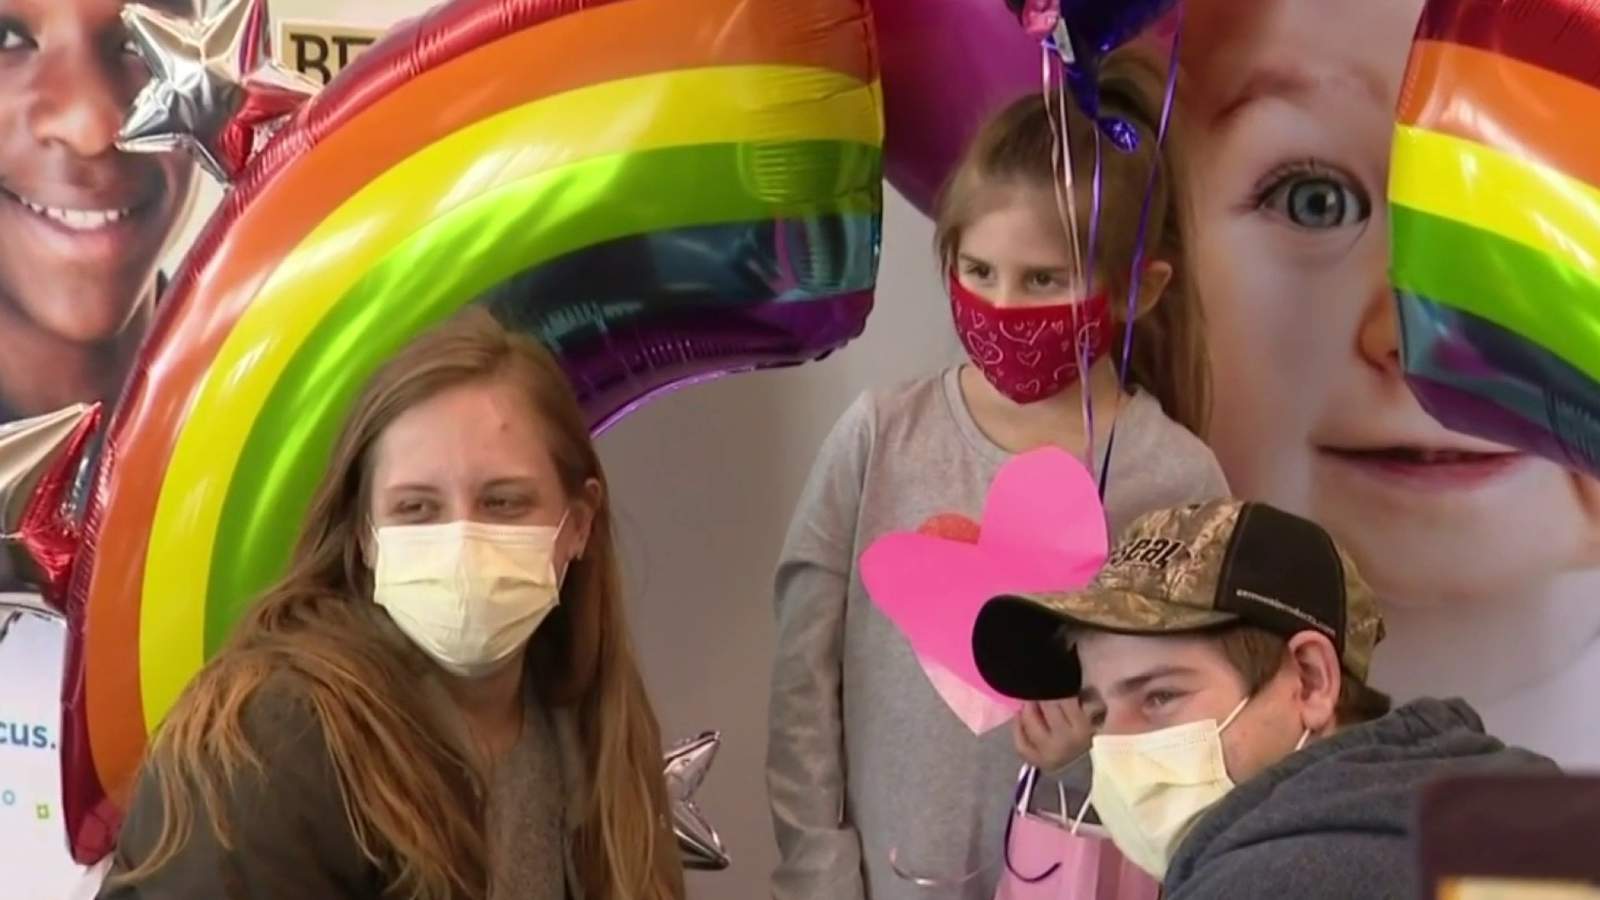 Children’s Hospital of Michigan gives special sendoff to 5-year-old girl who receives new heart